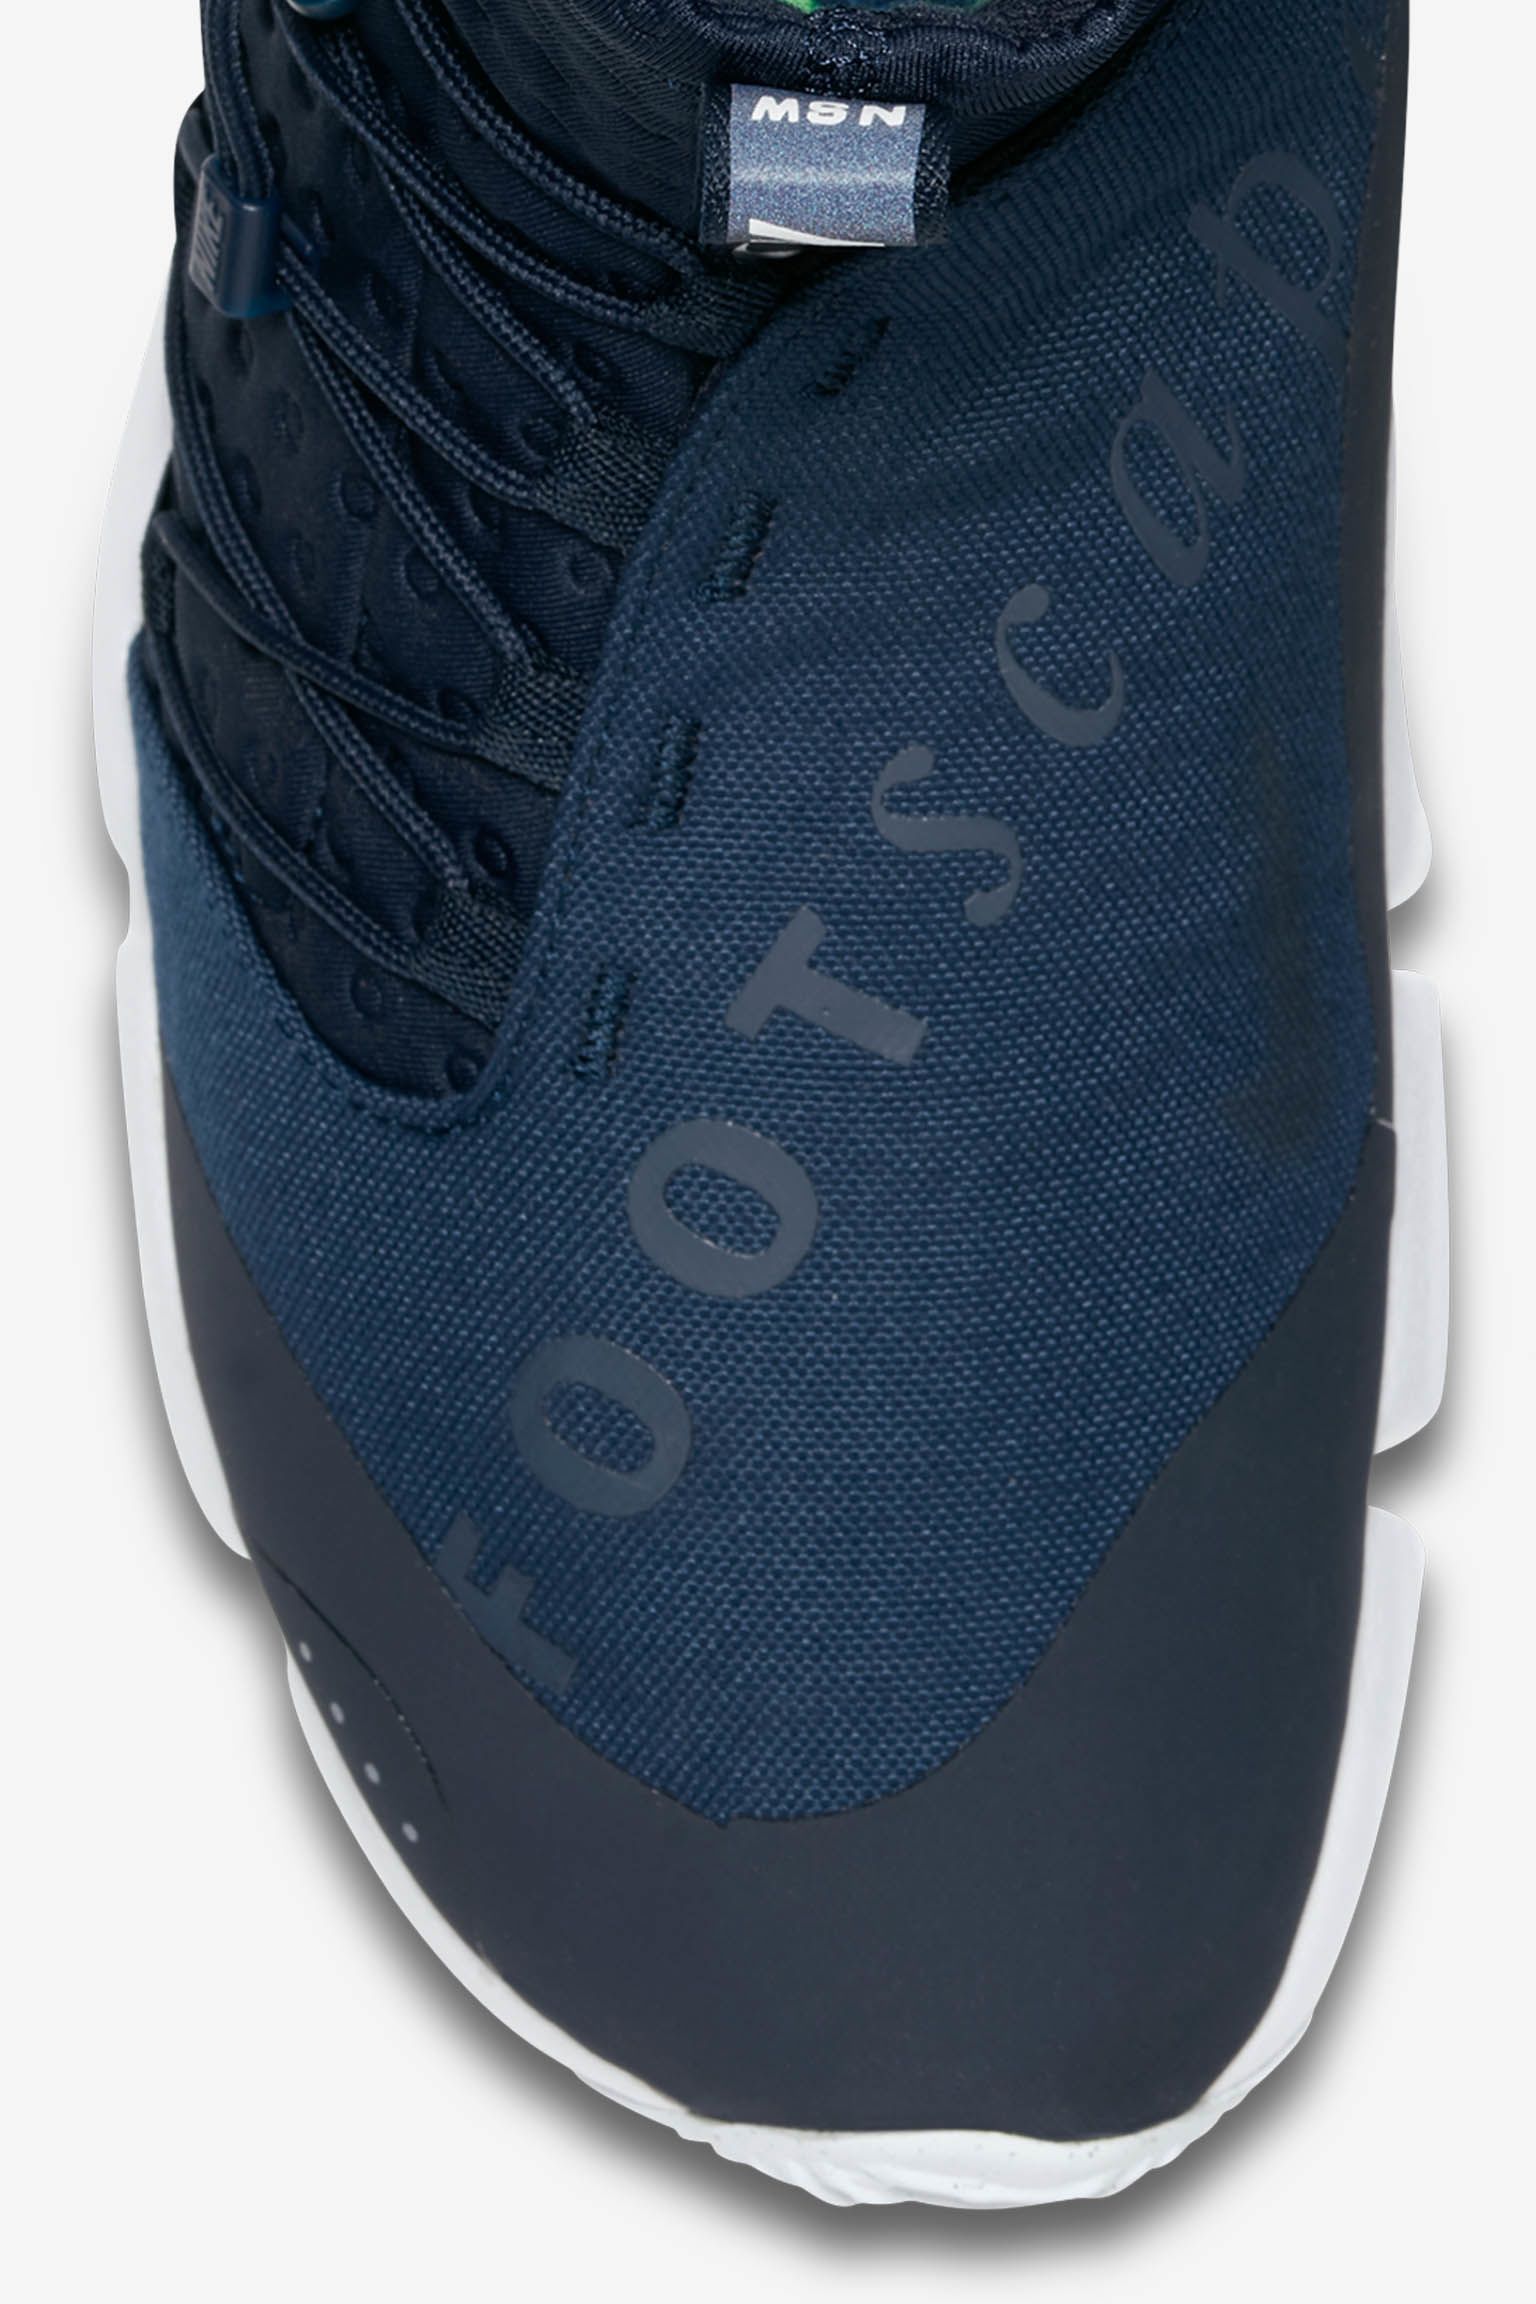 Nike Air Footscape Mid Utility 'Obsidian &amp; White' Date. Nike SNKRS